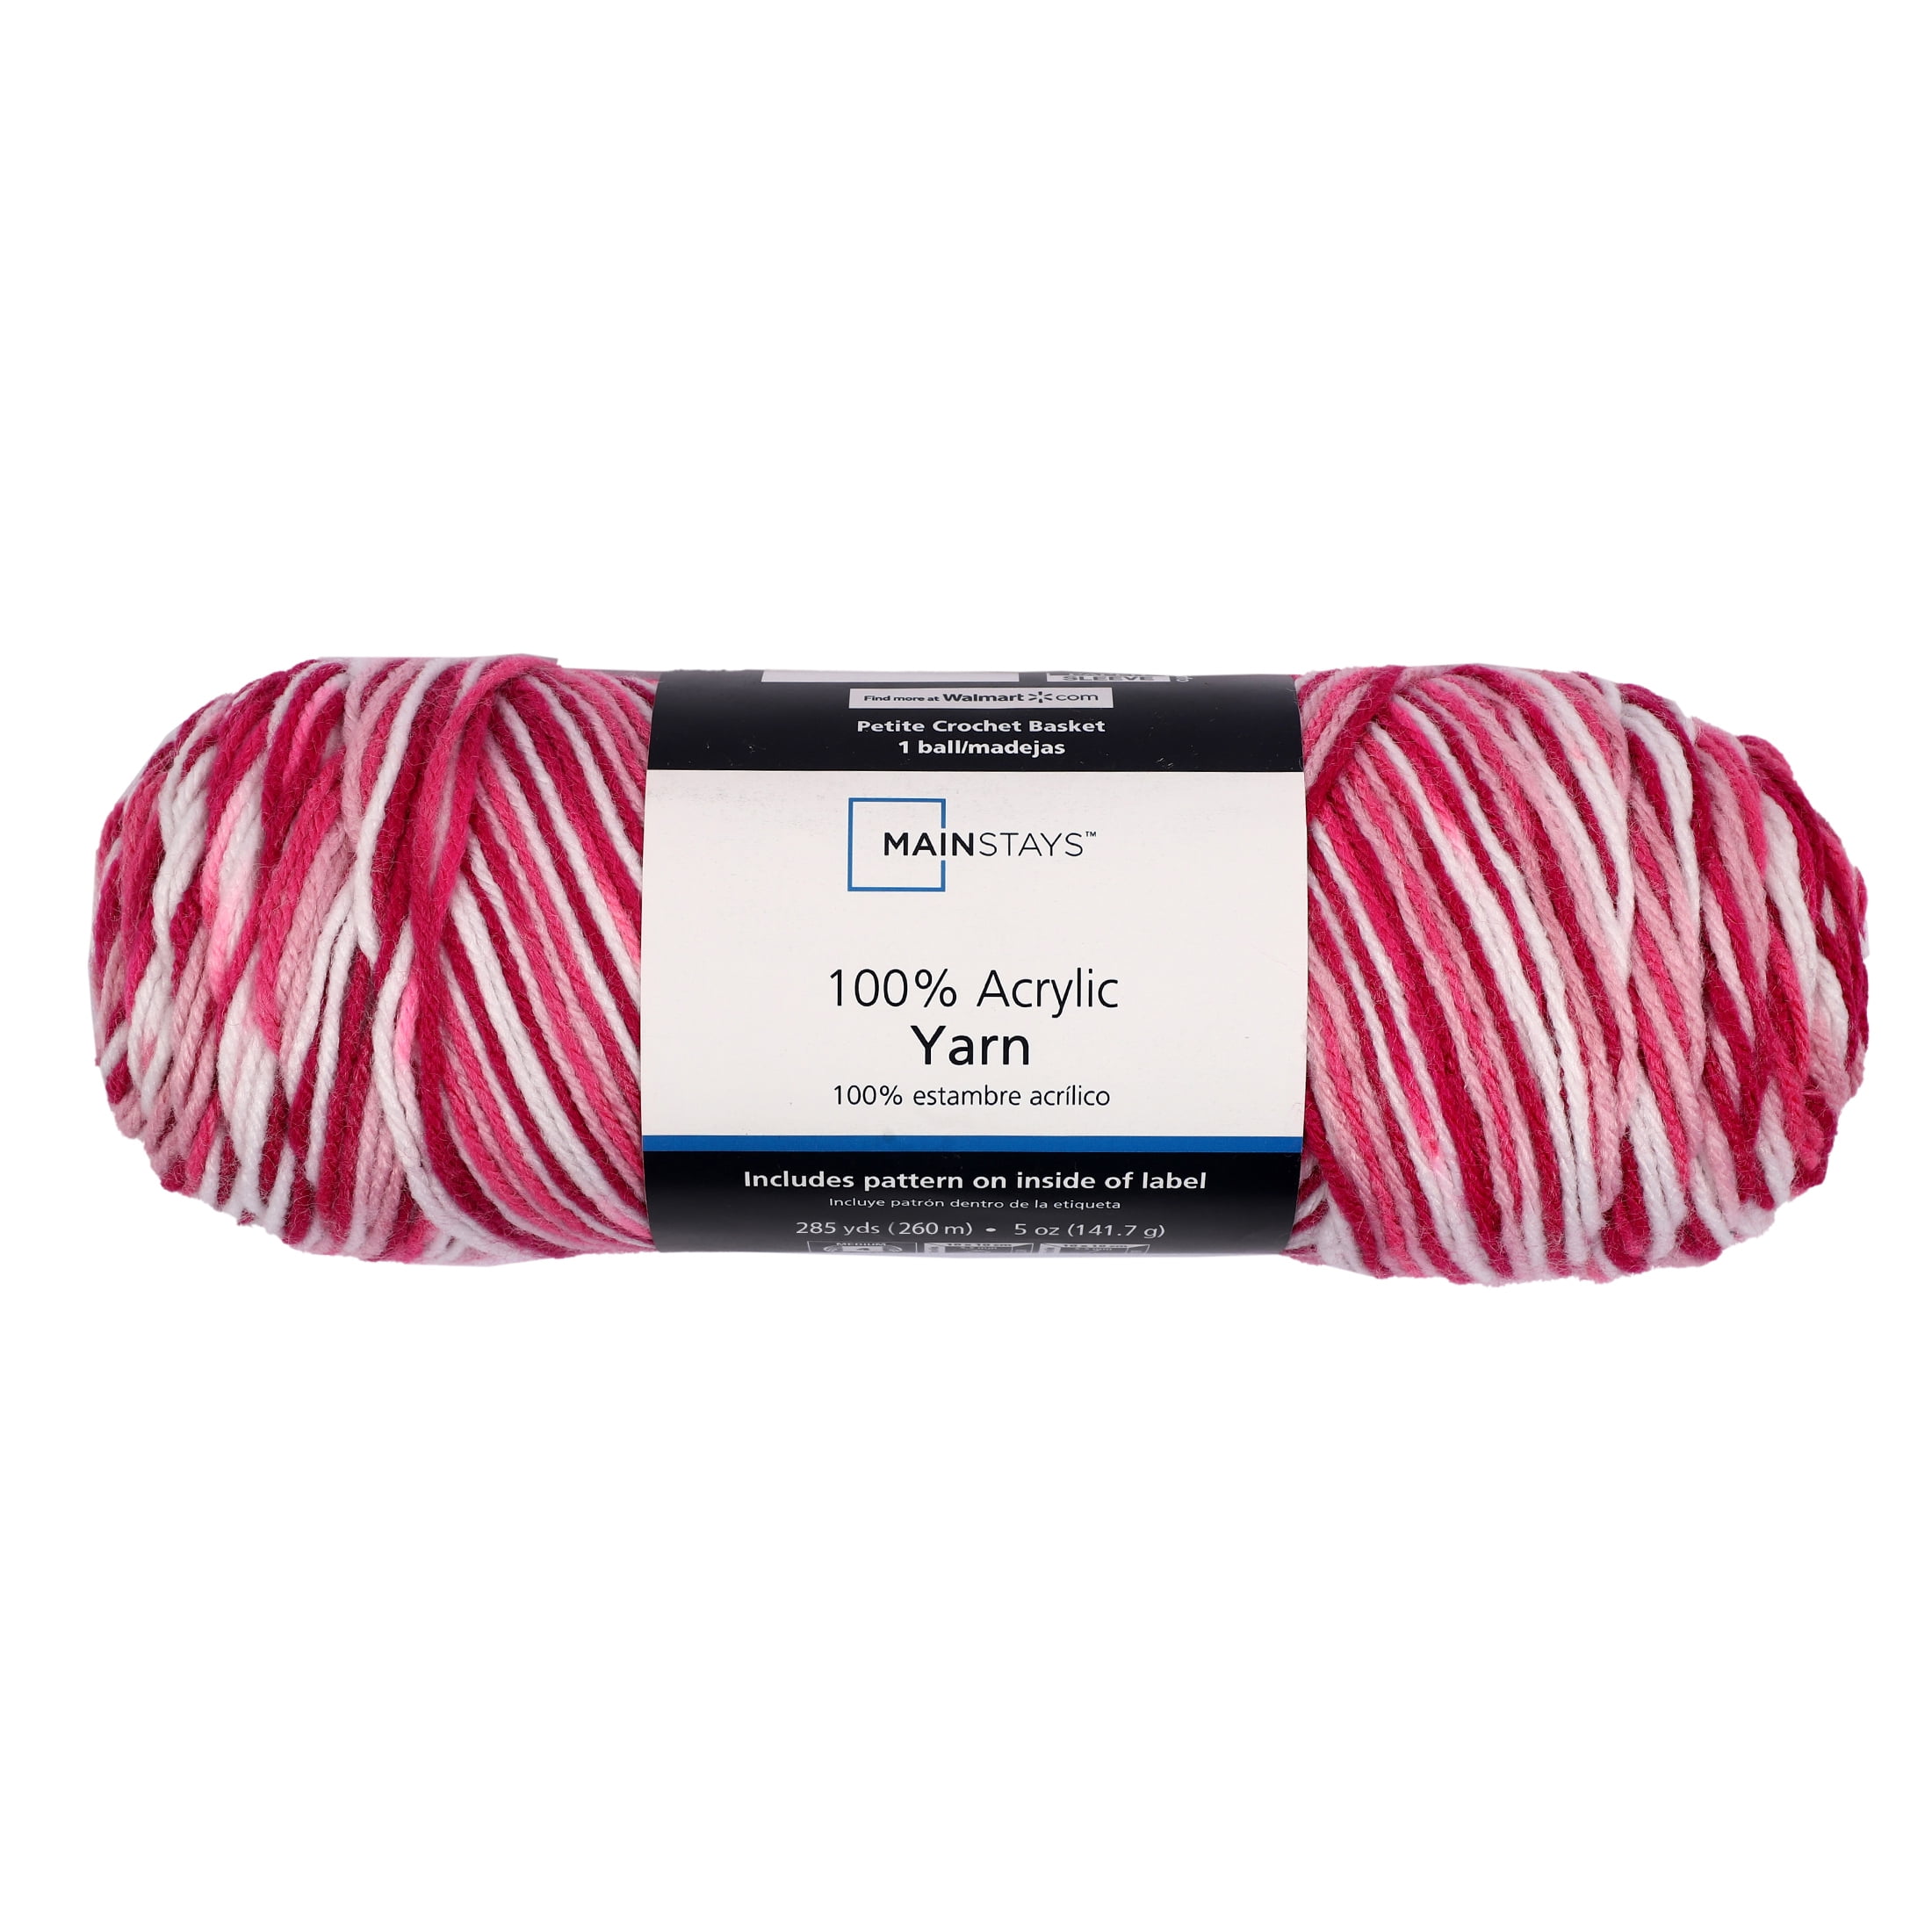 Lot of 2 ~ Mainstays Acrylic Yarn 5 oz in Pink Blend, New Model!